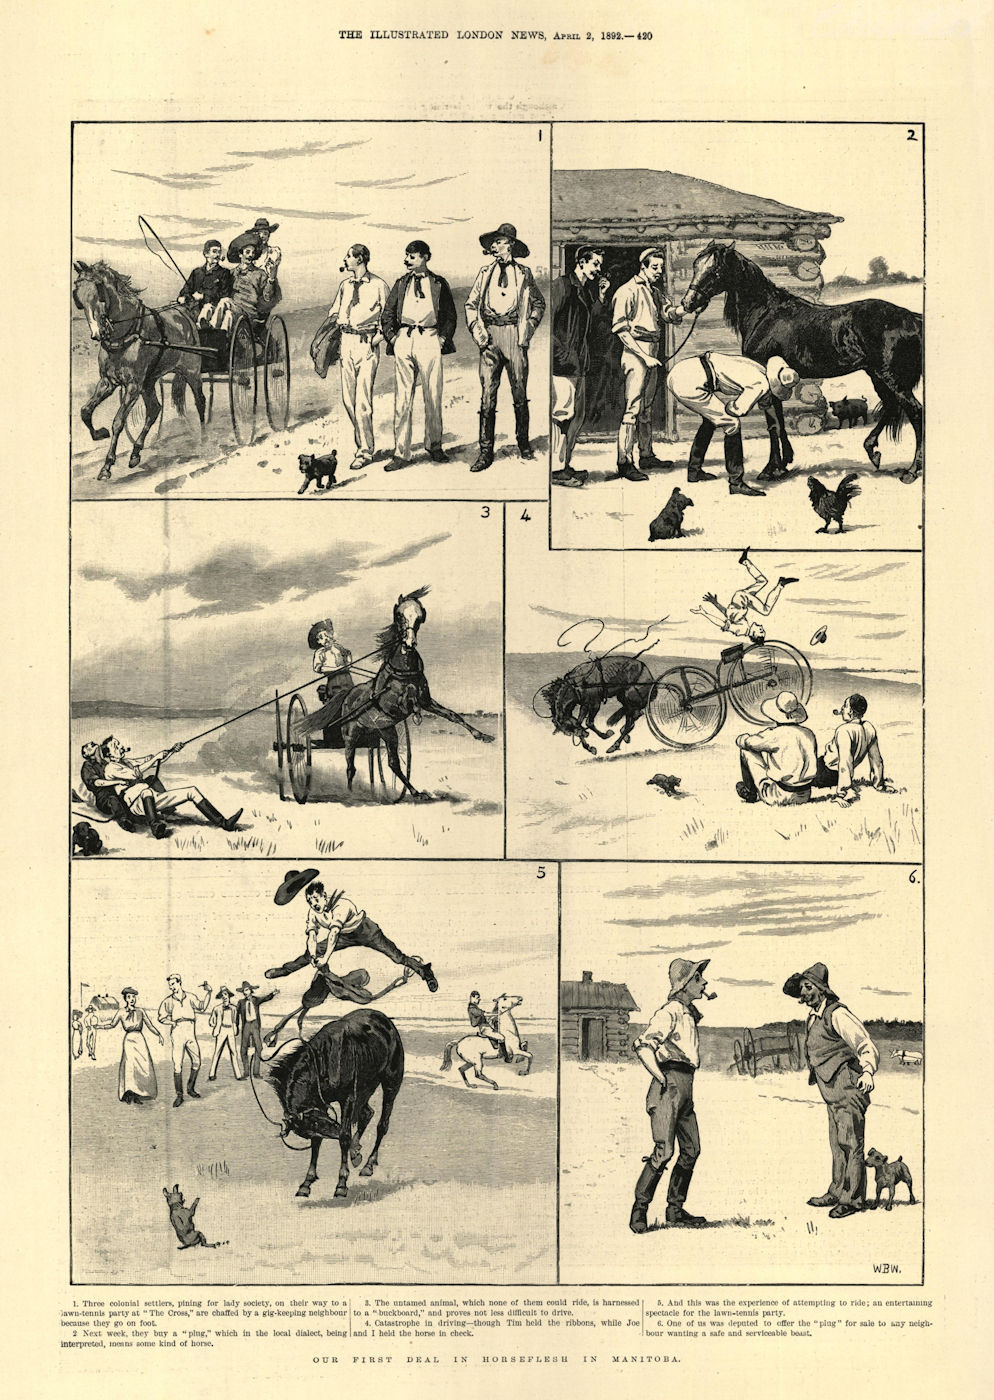 Associate Product Our first deal in horseflesh in Manitoba. Canada. Cartoons 1892 old print